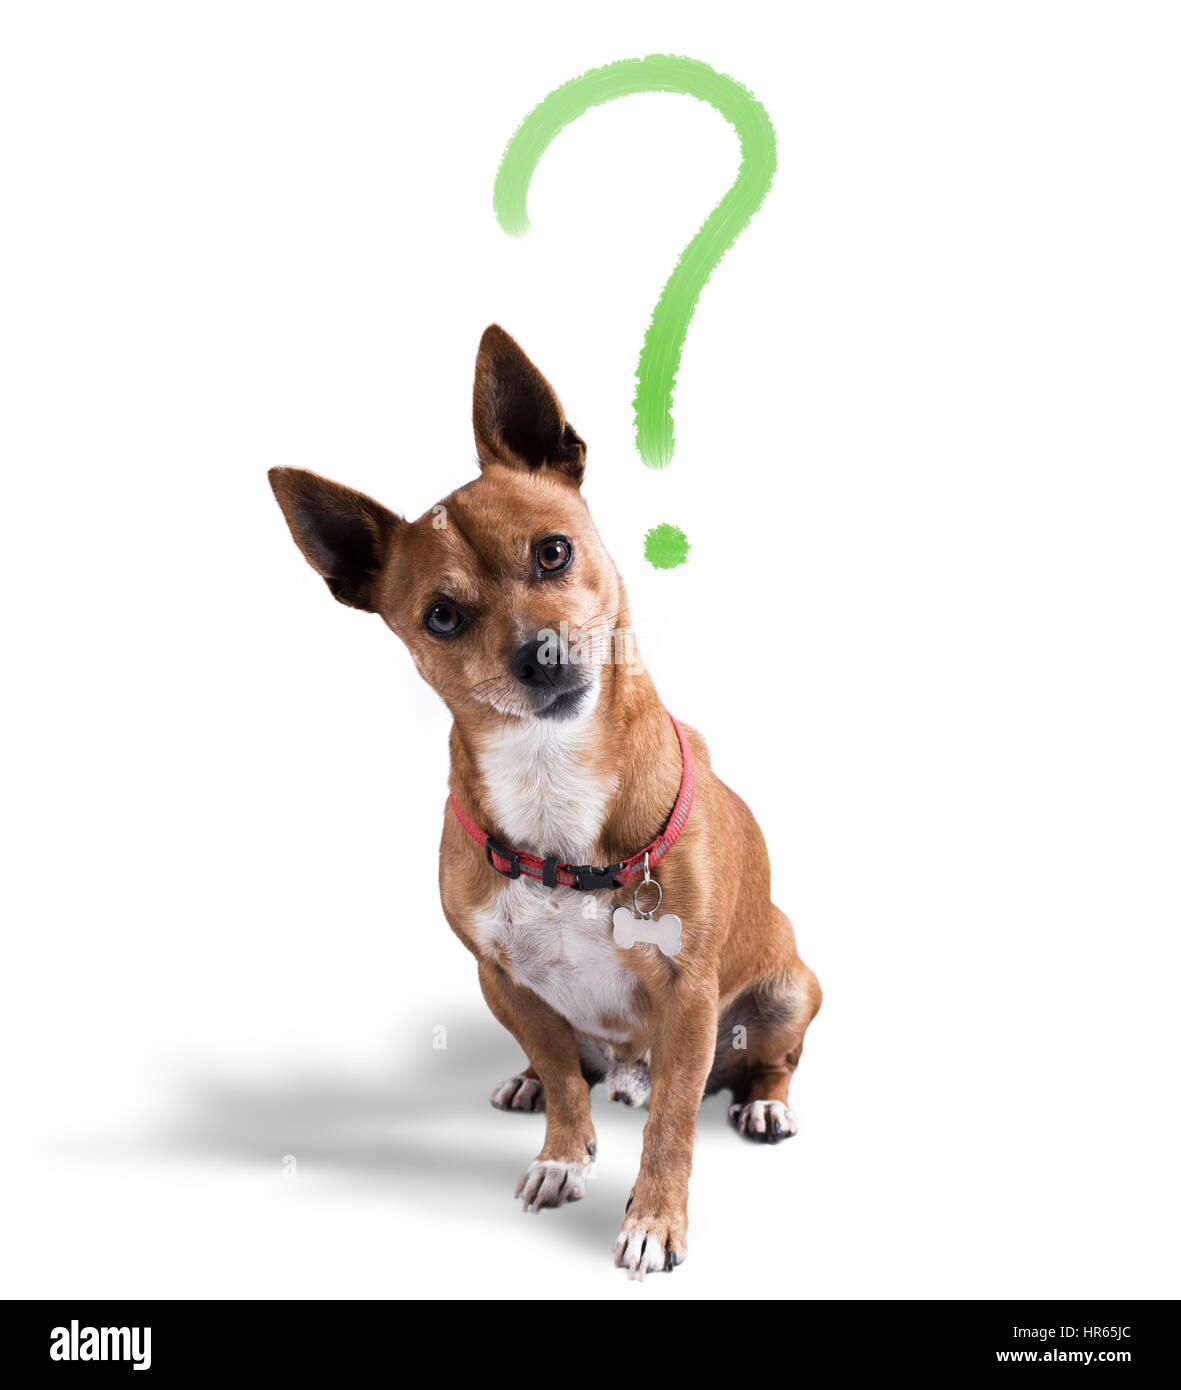 Dog with quizzical expression Stock Photo - Alamy